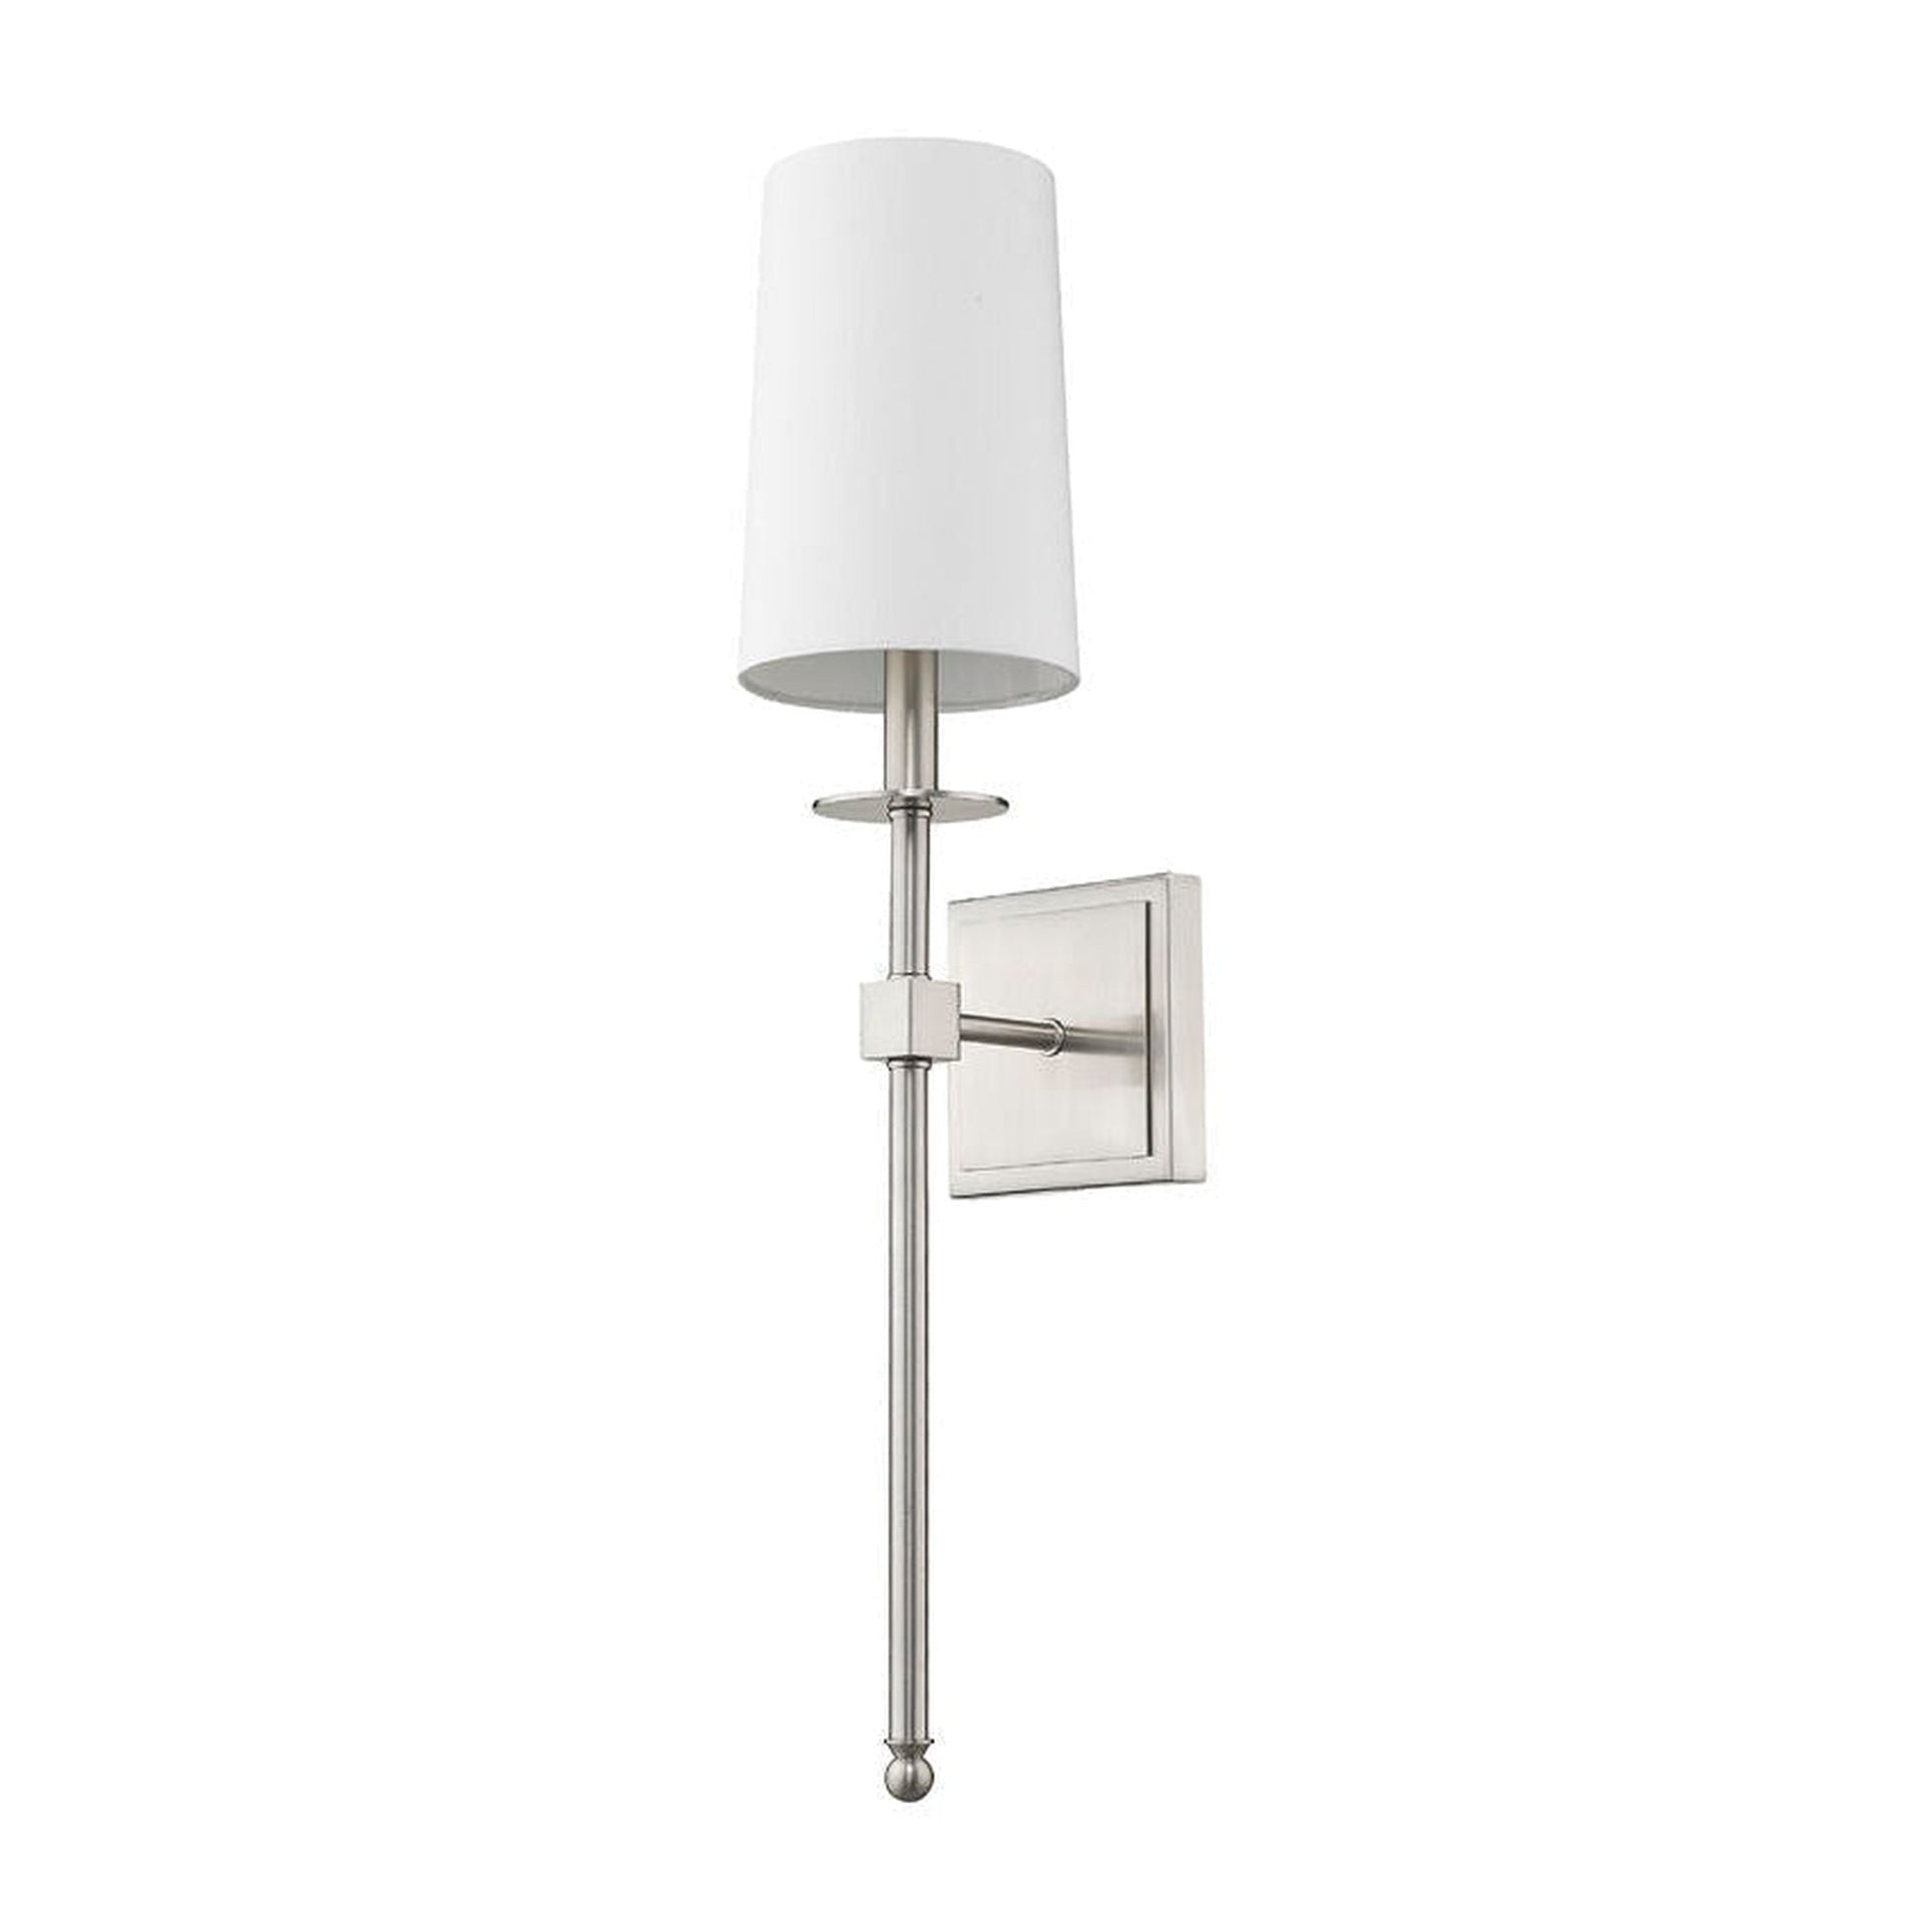 Z-Lite Camila 6" 1-Light Brushed Nickel Wall Sconce With White Fabric Shade